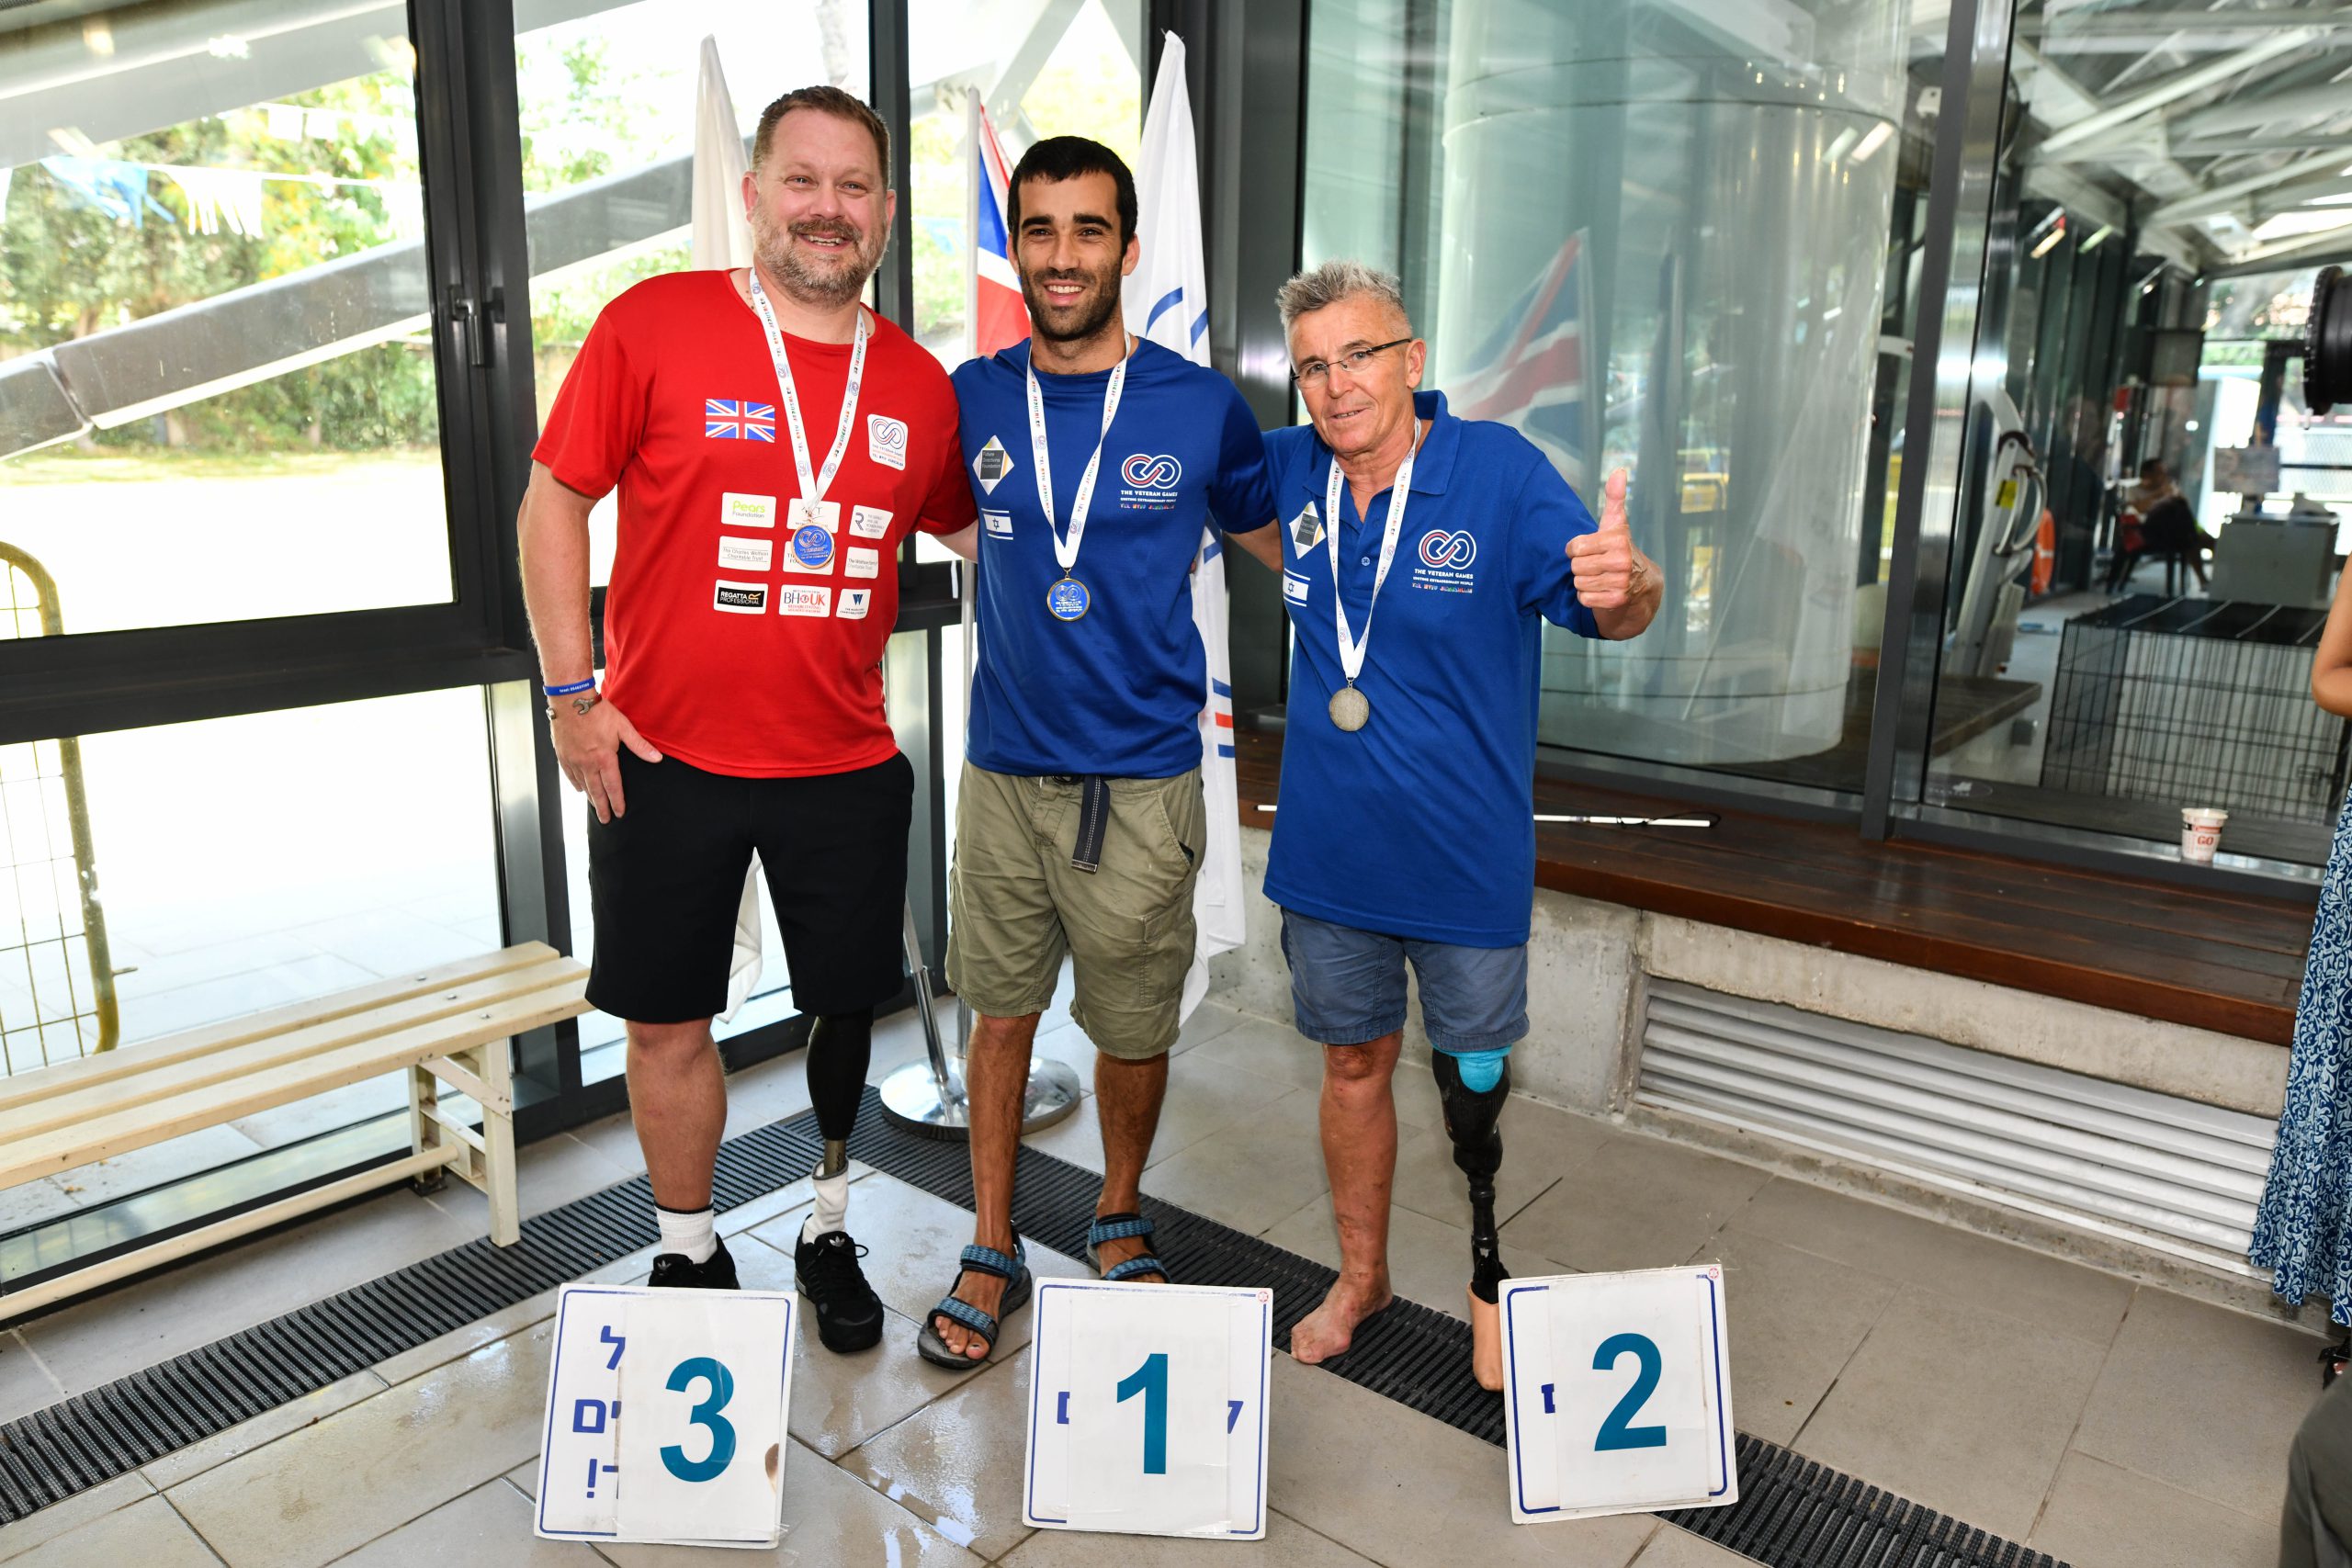 Wounded vets from Israel and the UK test their mettle at 3rd annual Veterans Games